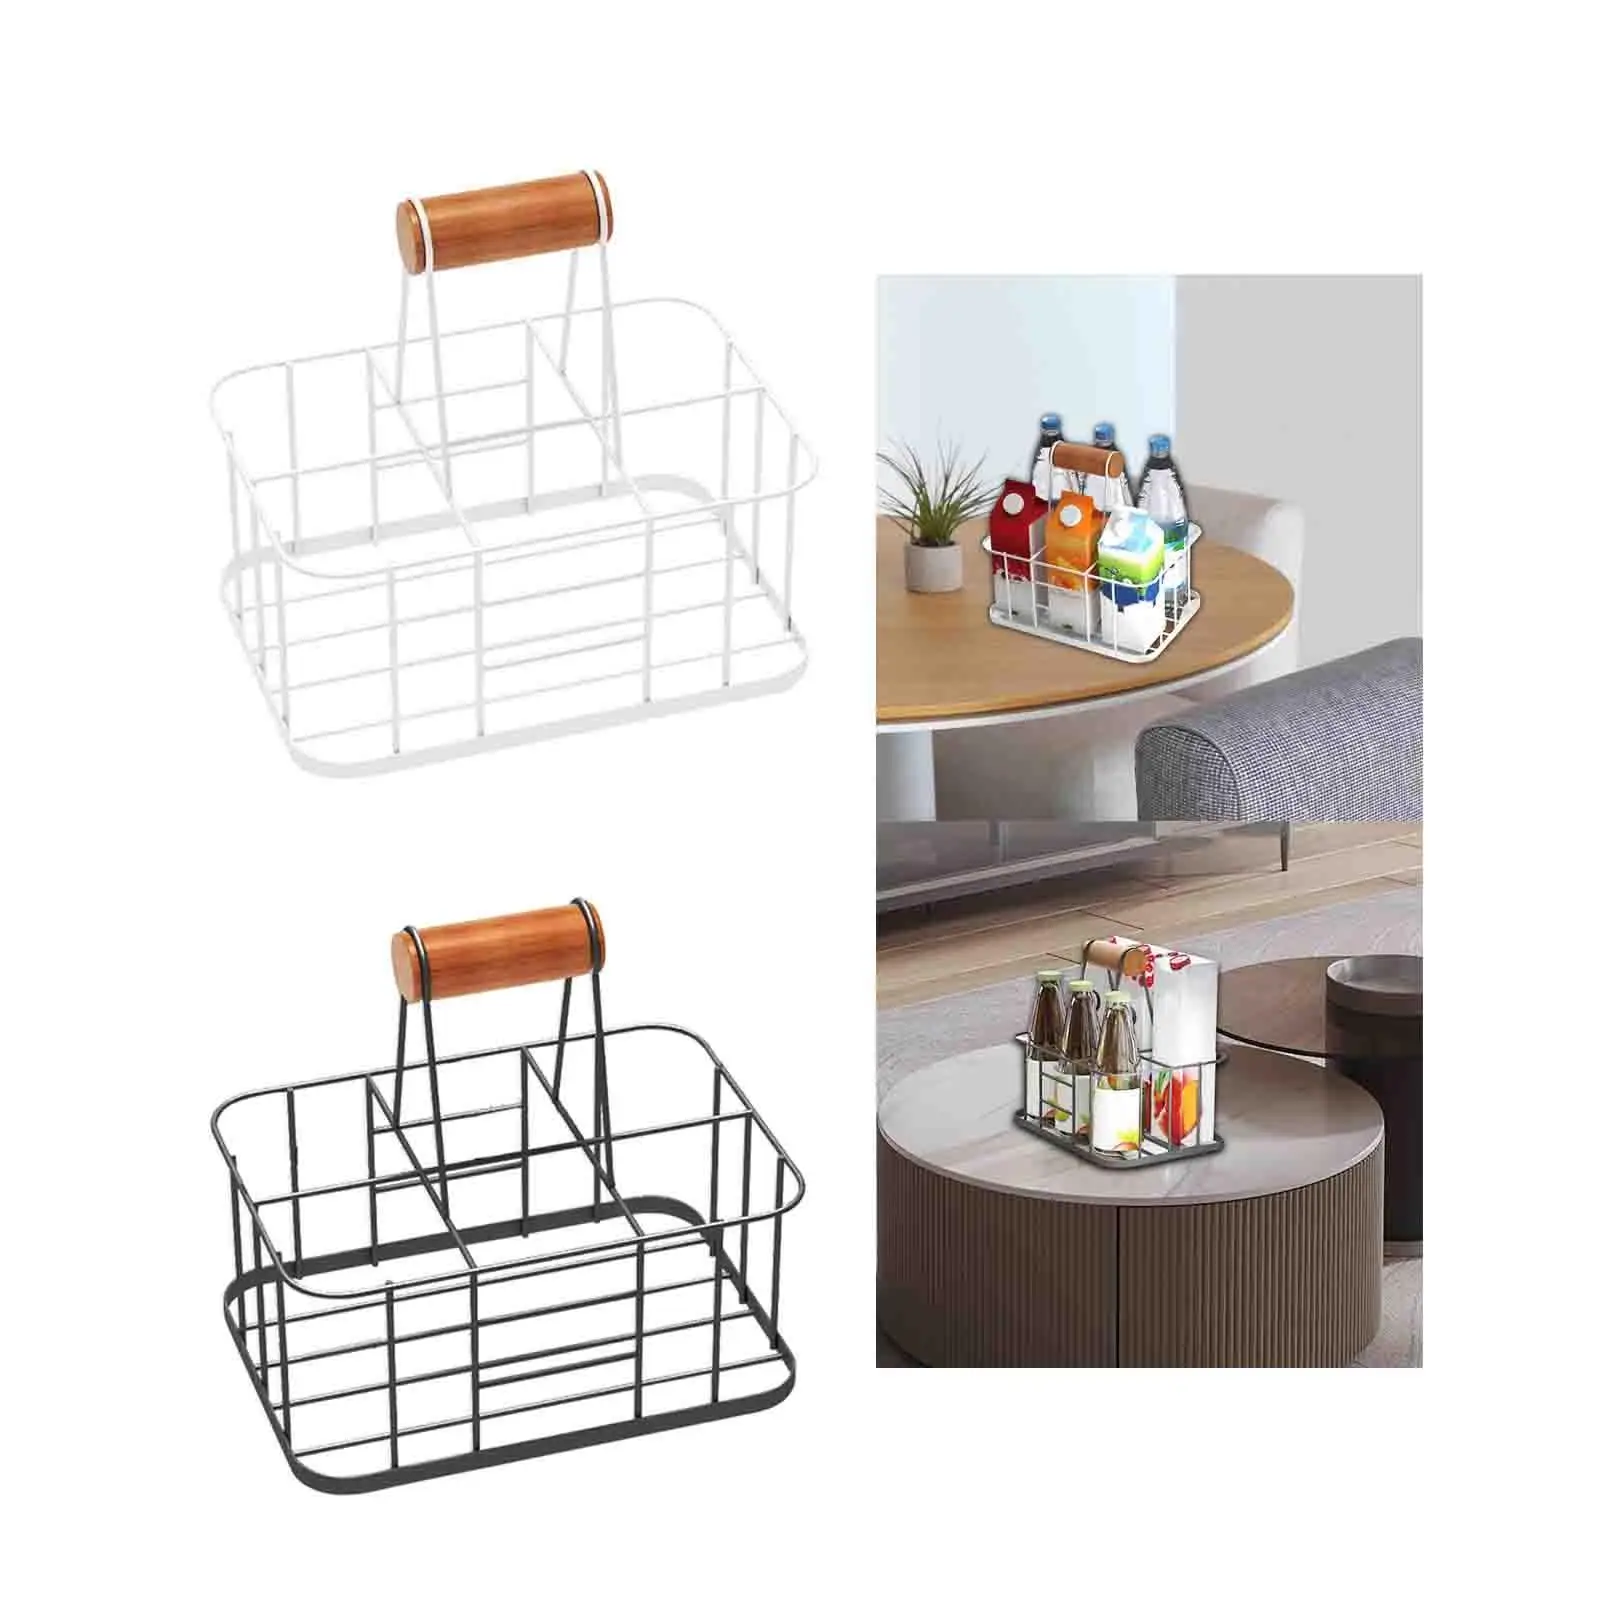 Drink Carrier Supplies Multifunction Durable Drink Caddy Holder Wine Bottle Storage for Office Catering Wedding Party Cafe KTV